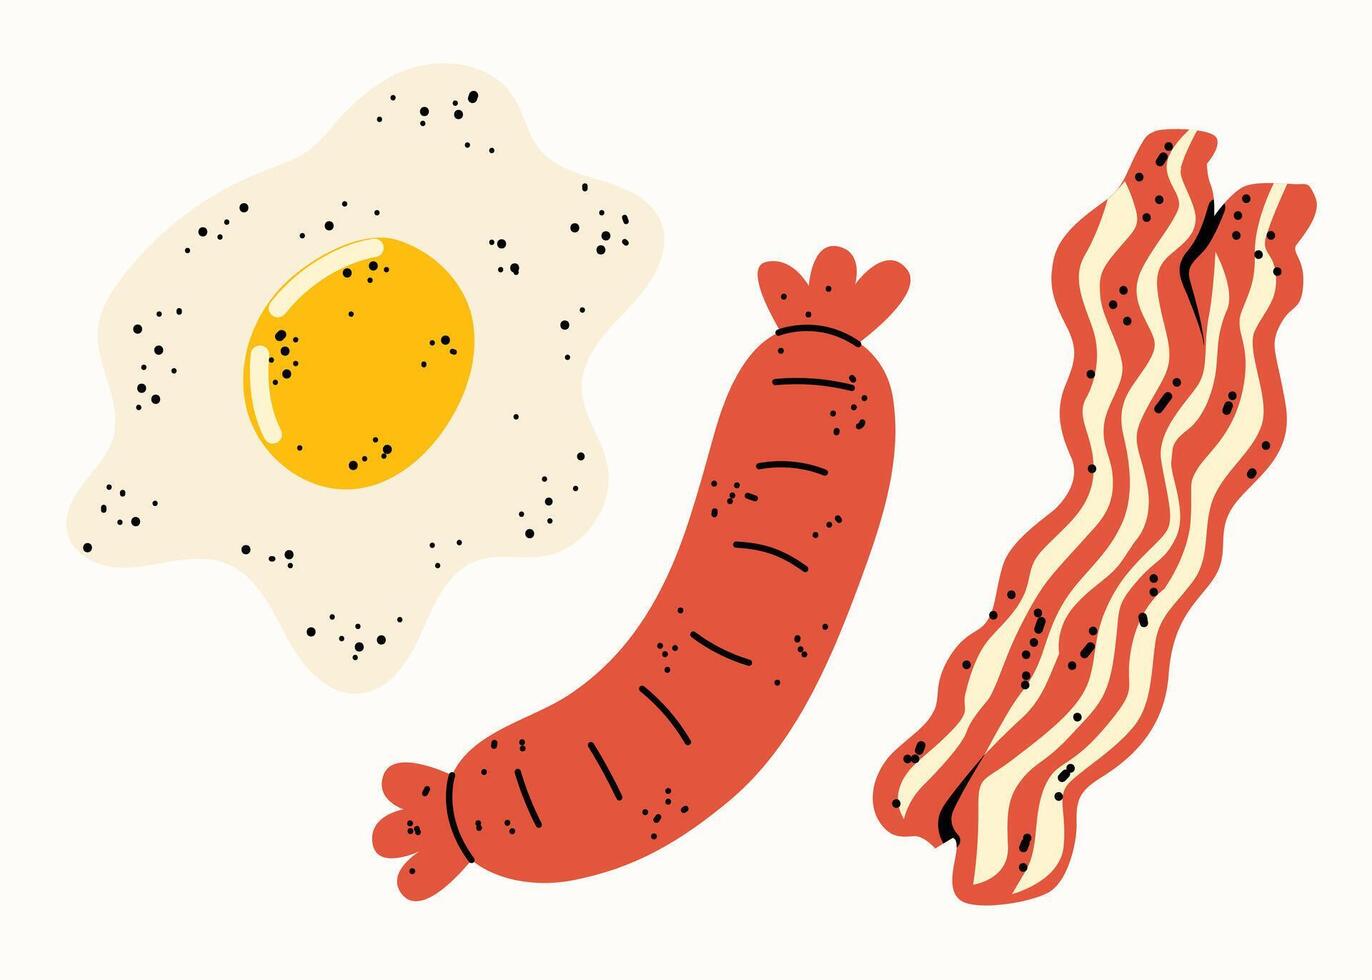 Healthy breakfast. Fried egg, sausage and bacon. Set of vector flat illustrations in hand drawn style. Delicious dishes. Cartoon food icons. Isolated on a white background.